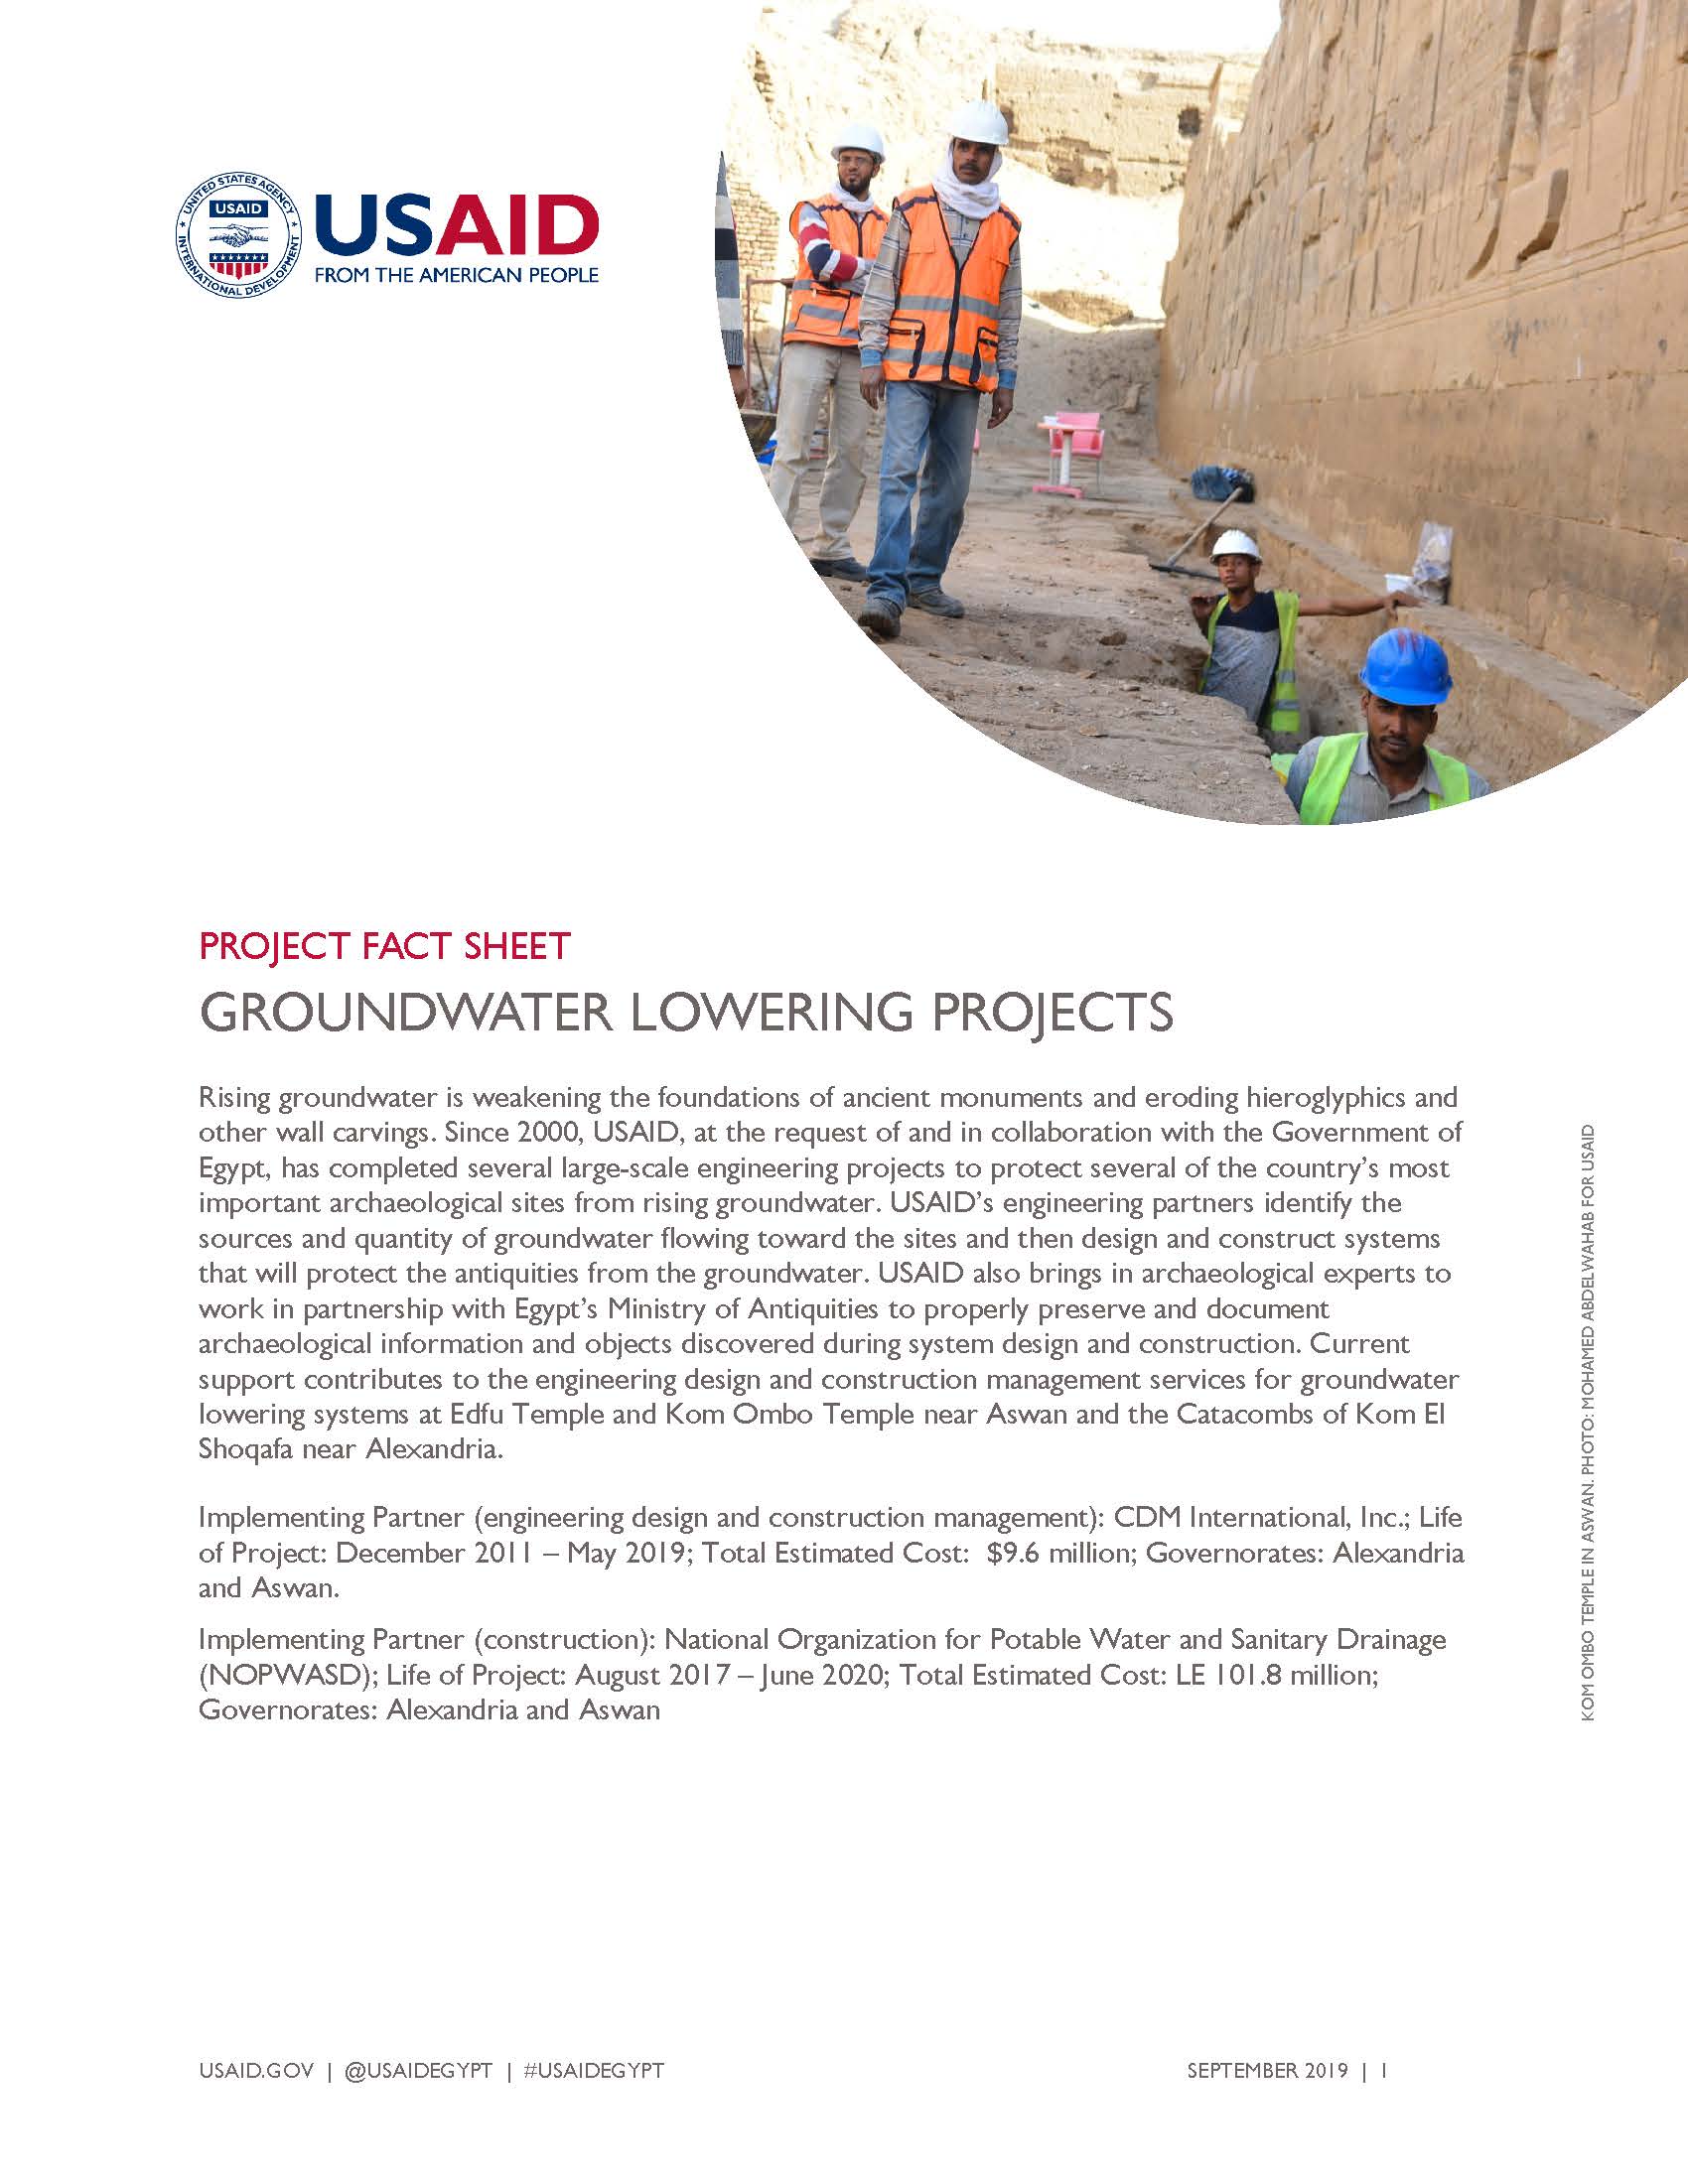 USAID/Egypt Activity Fact Sheet: Groundwater Lowering